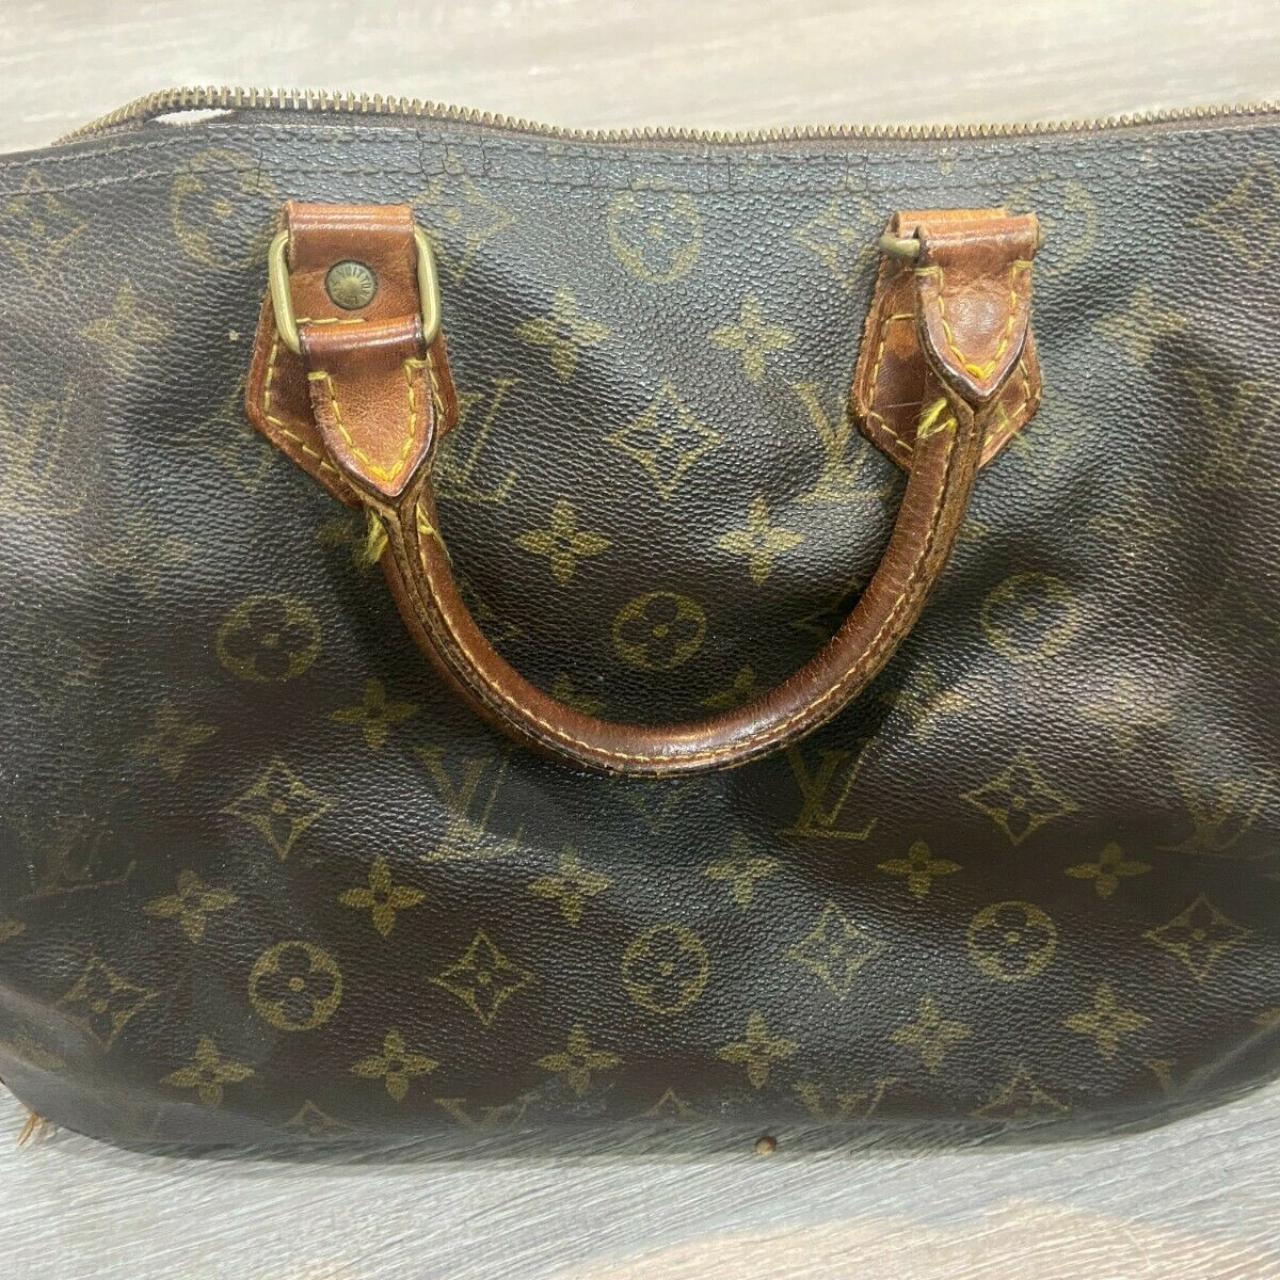 We guarantee this is an authentic Louis Vuitton - Depop